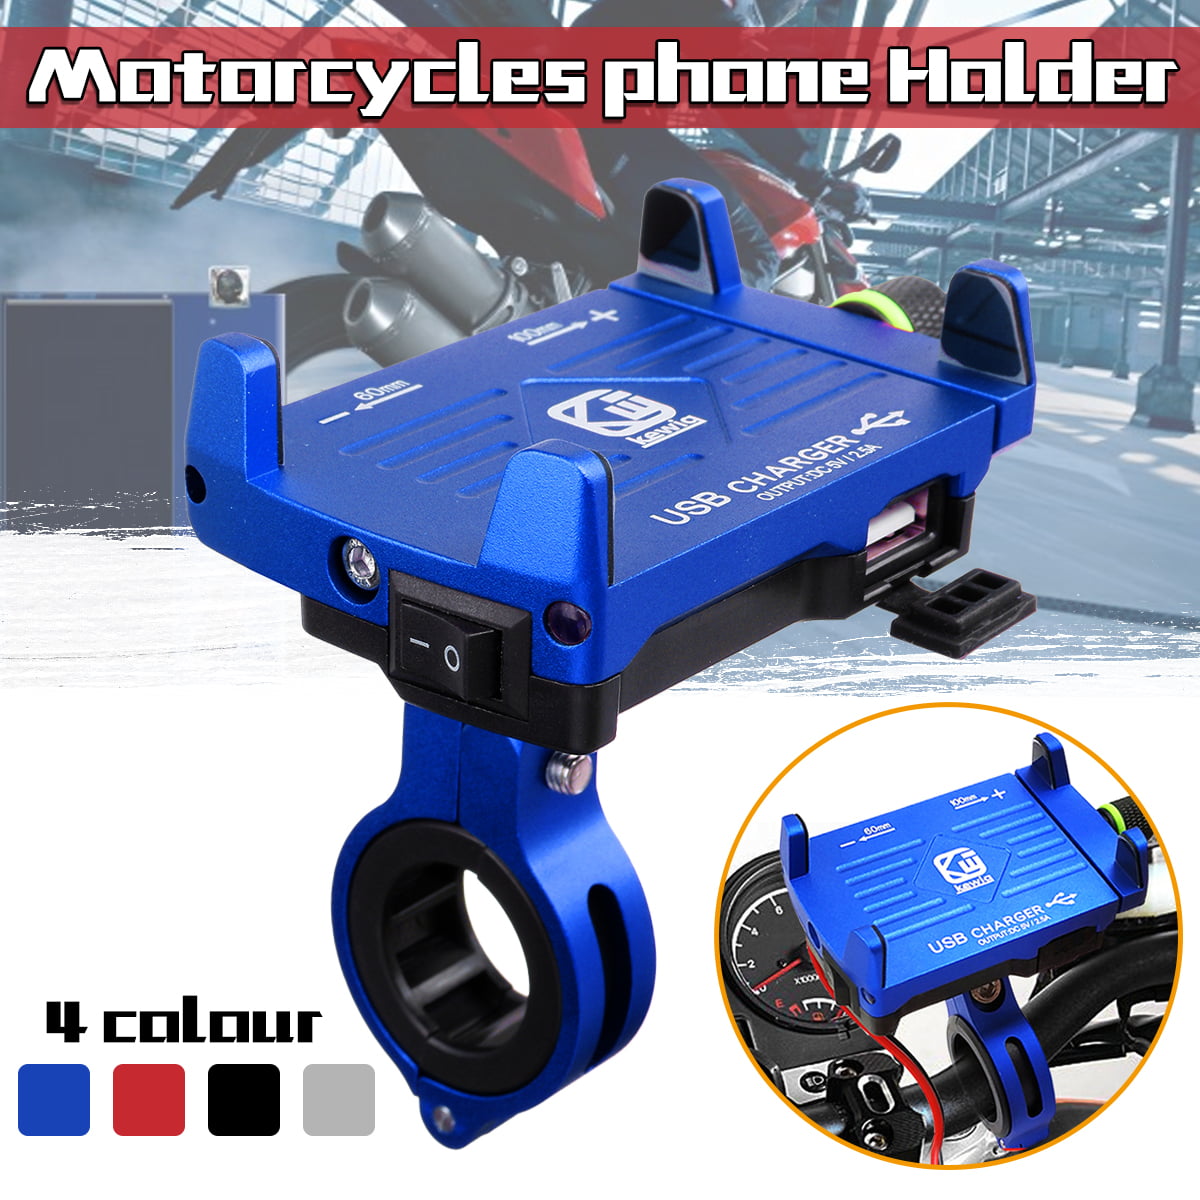 Motorcycle MTB Bicycle Bike Handlebar Cell Phone Mount Holder & USB Charger Port